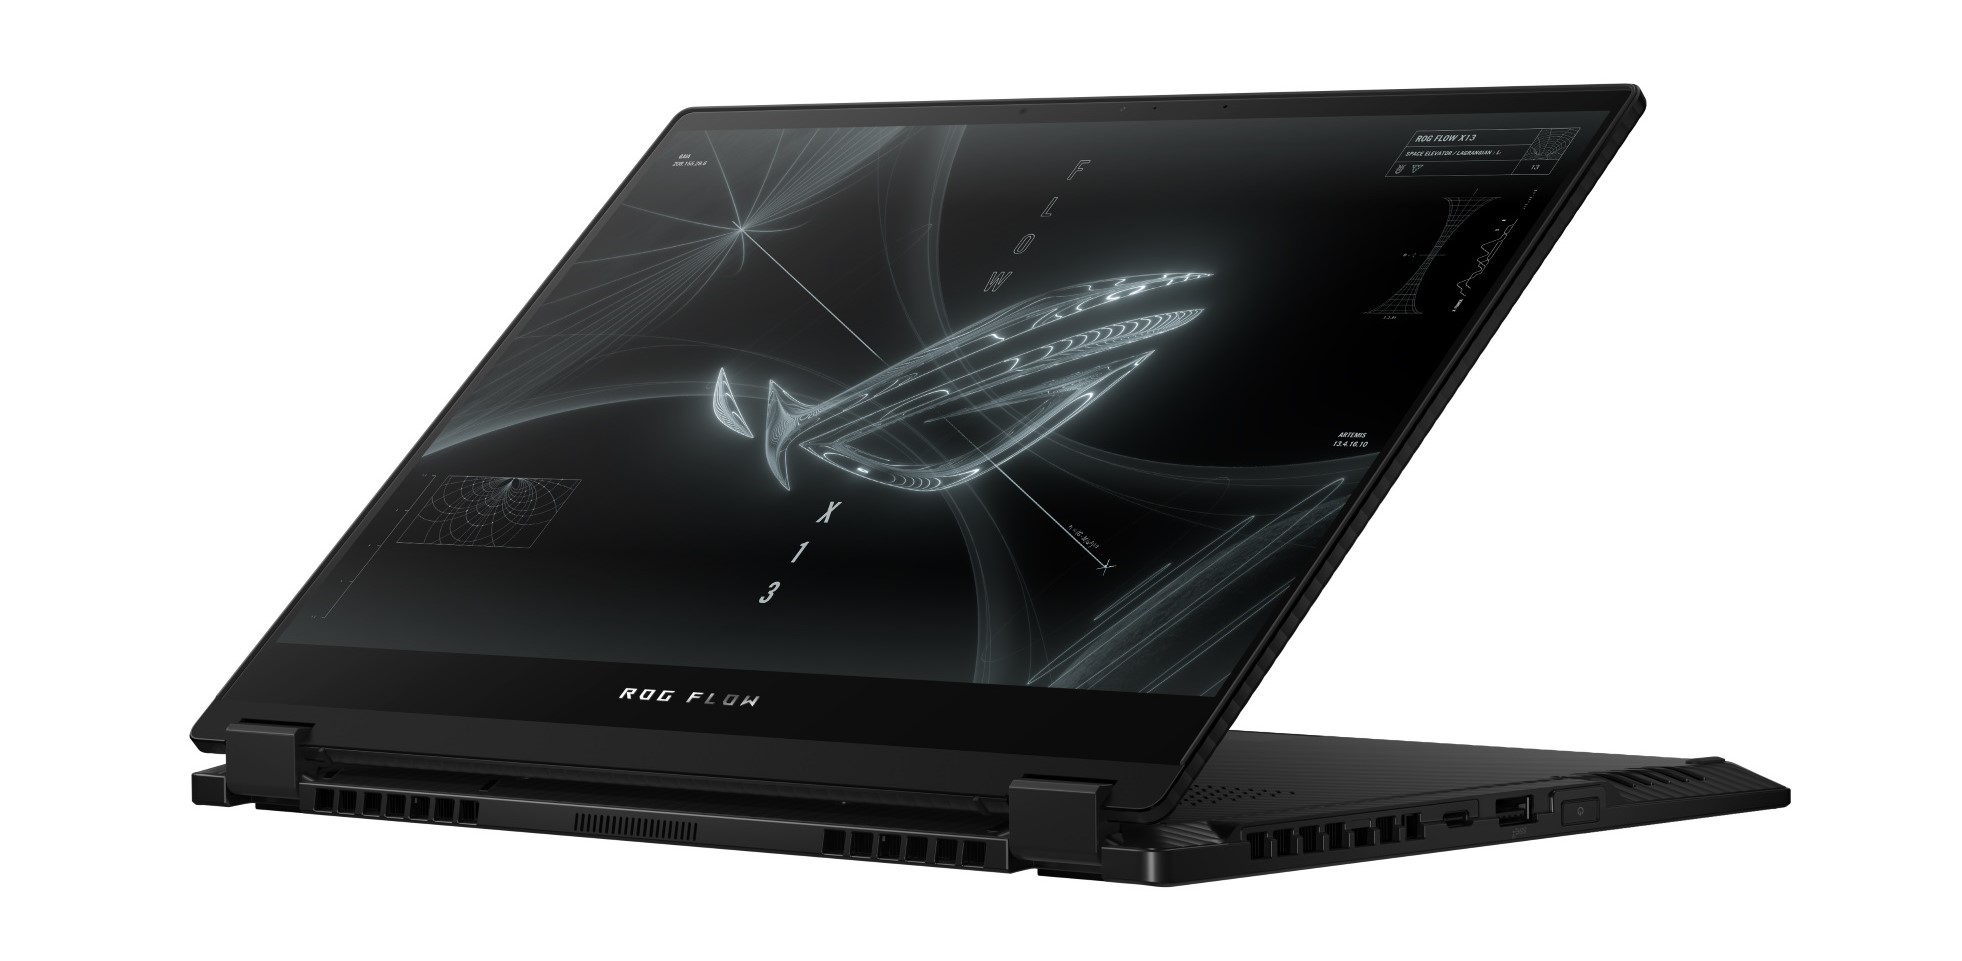 CES 2021: Latest lineup from ASUS includes ROG Flow X13 and ZenBook Pro Duo with ScreenPad Plus